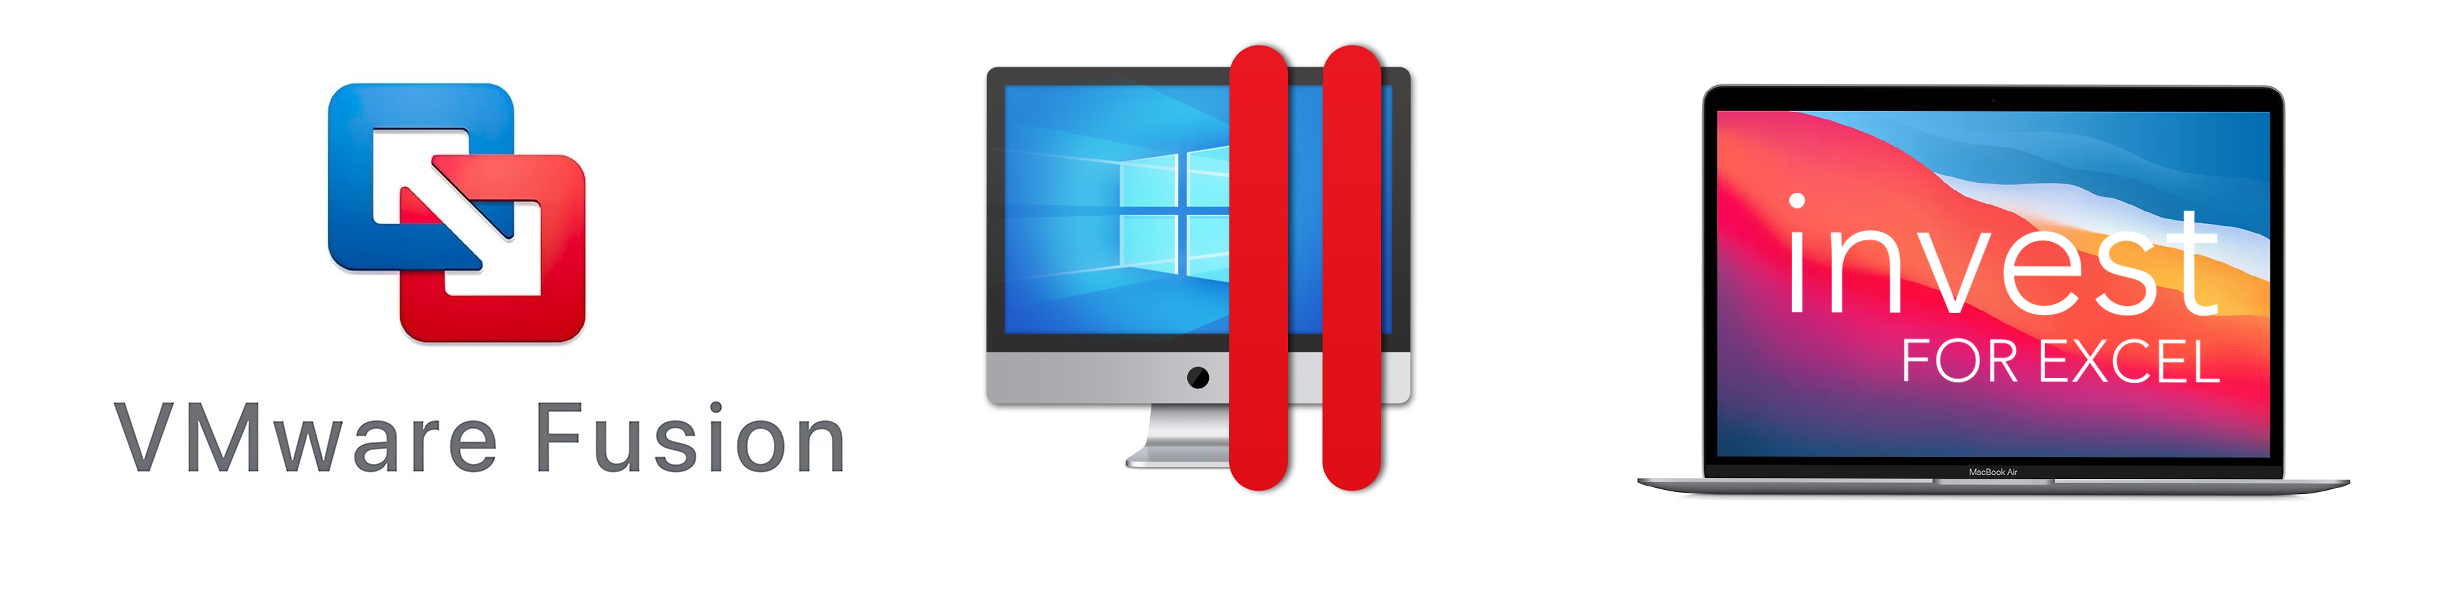 Run Invest for Excel on Mac: Mac OS, Windows 11, Parallels Desktop for Mac, VMware Fusion